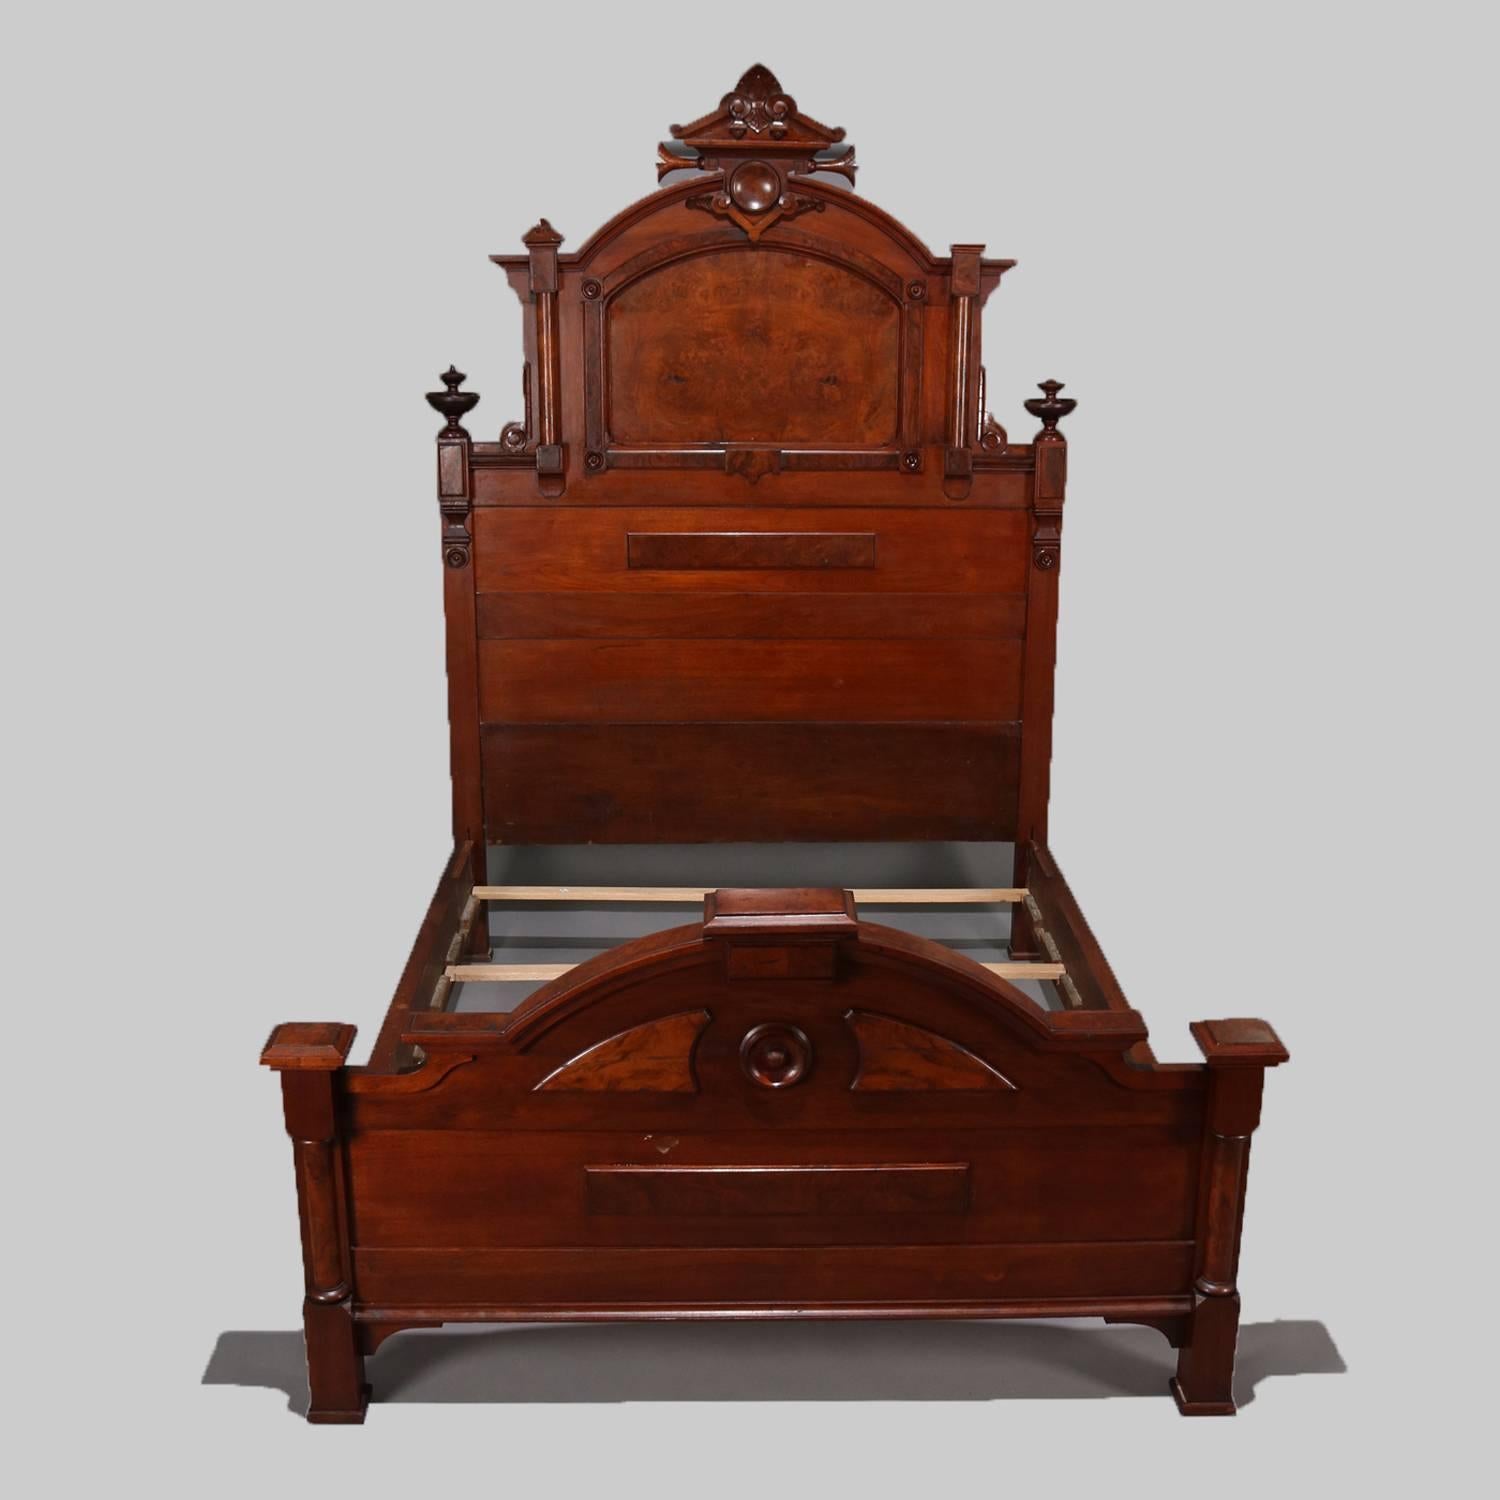 Antique Renaissance Revival carved walnut bed frame features carved fleur de lis crest, arch form headboard with burl panels and flanked by columns with turned finials, full/double size, circa 1870.

Measures: 89